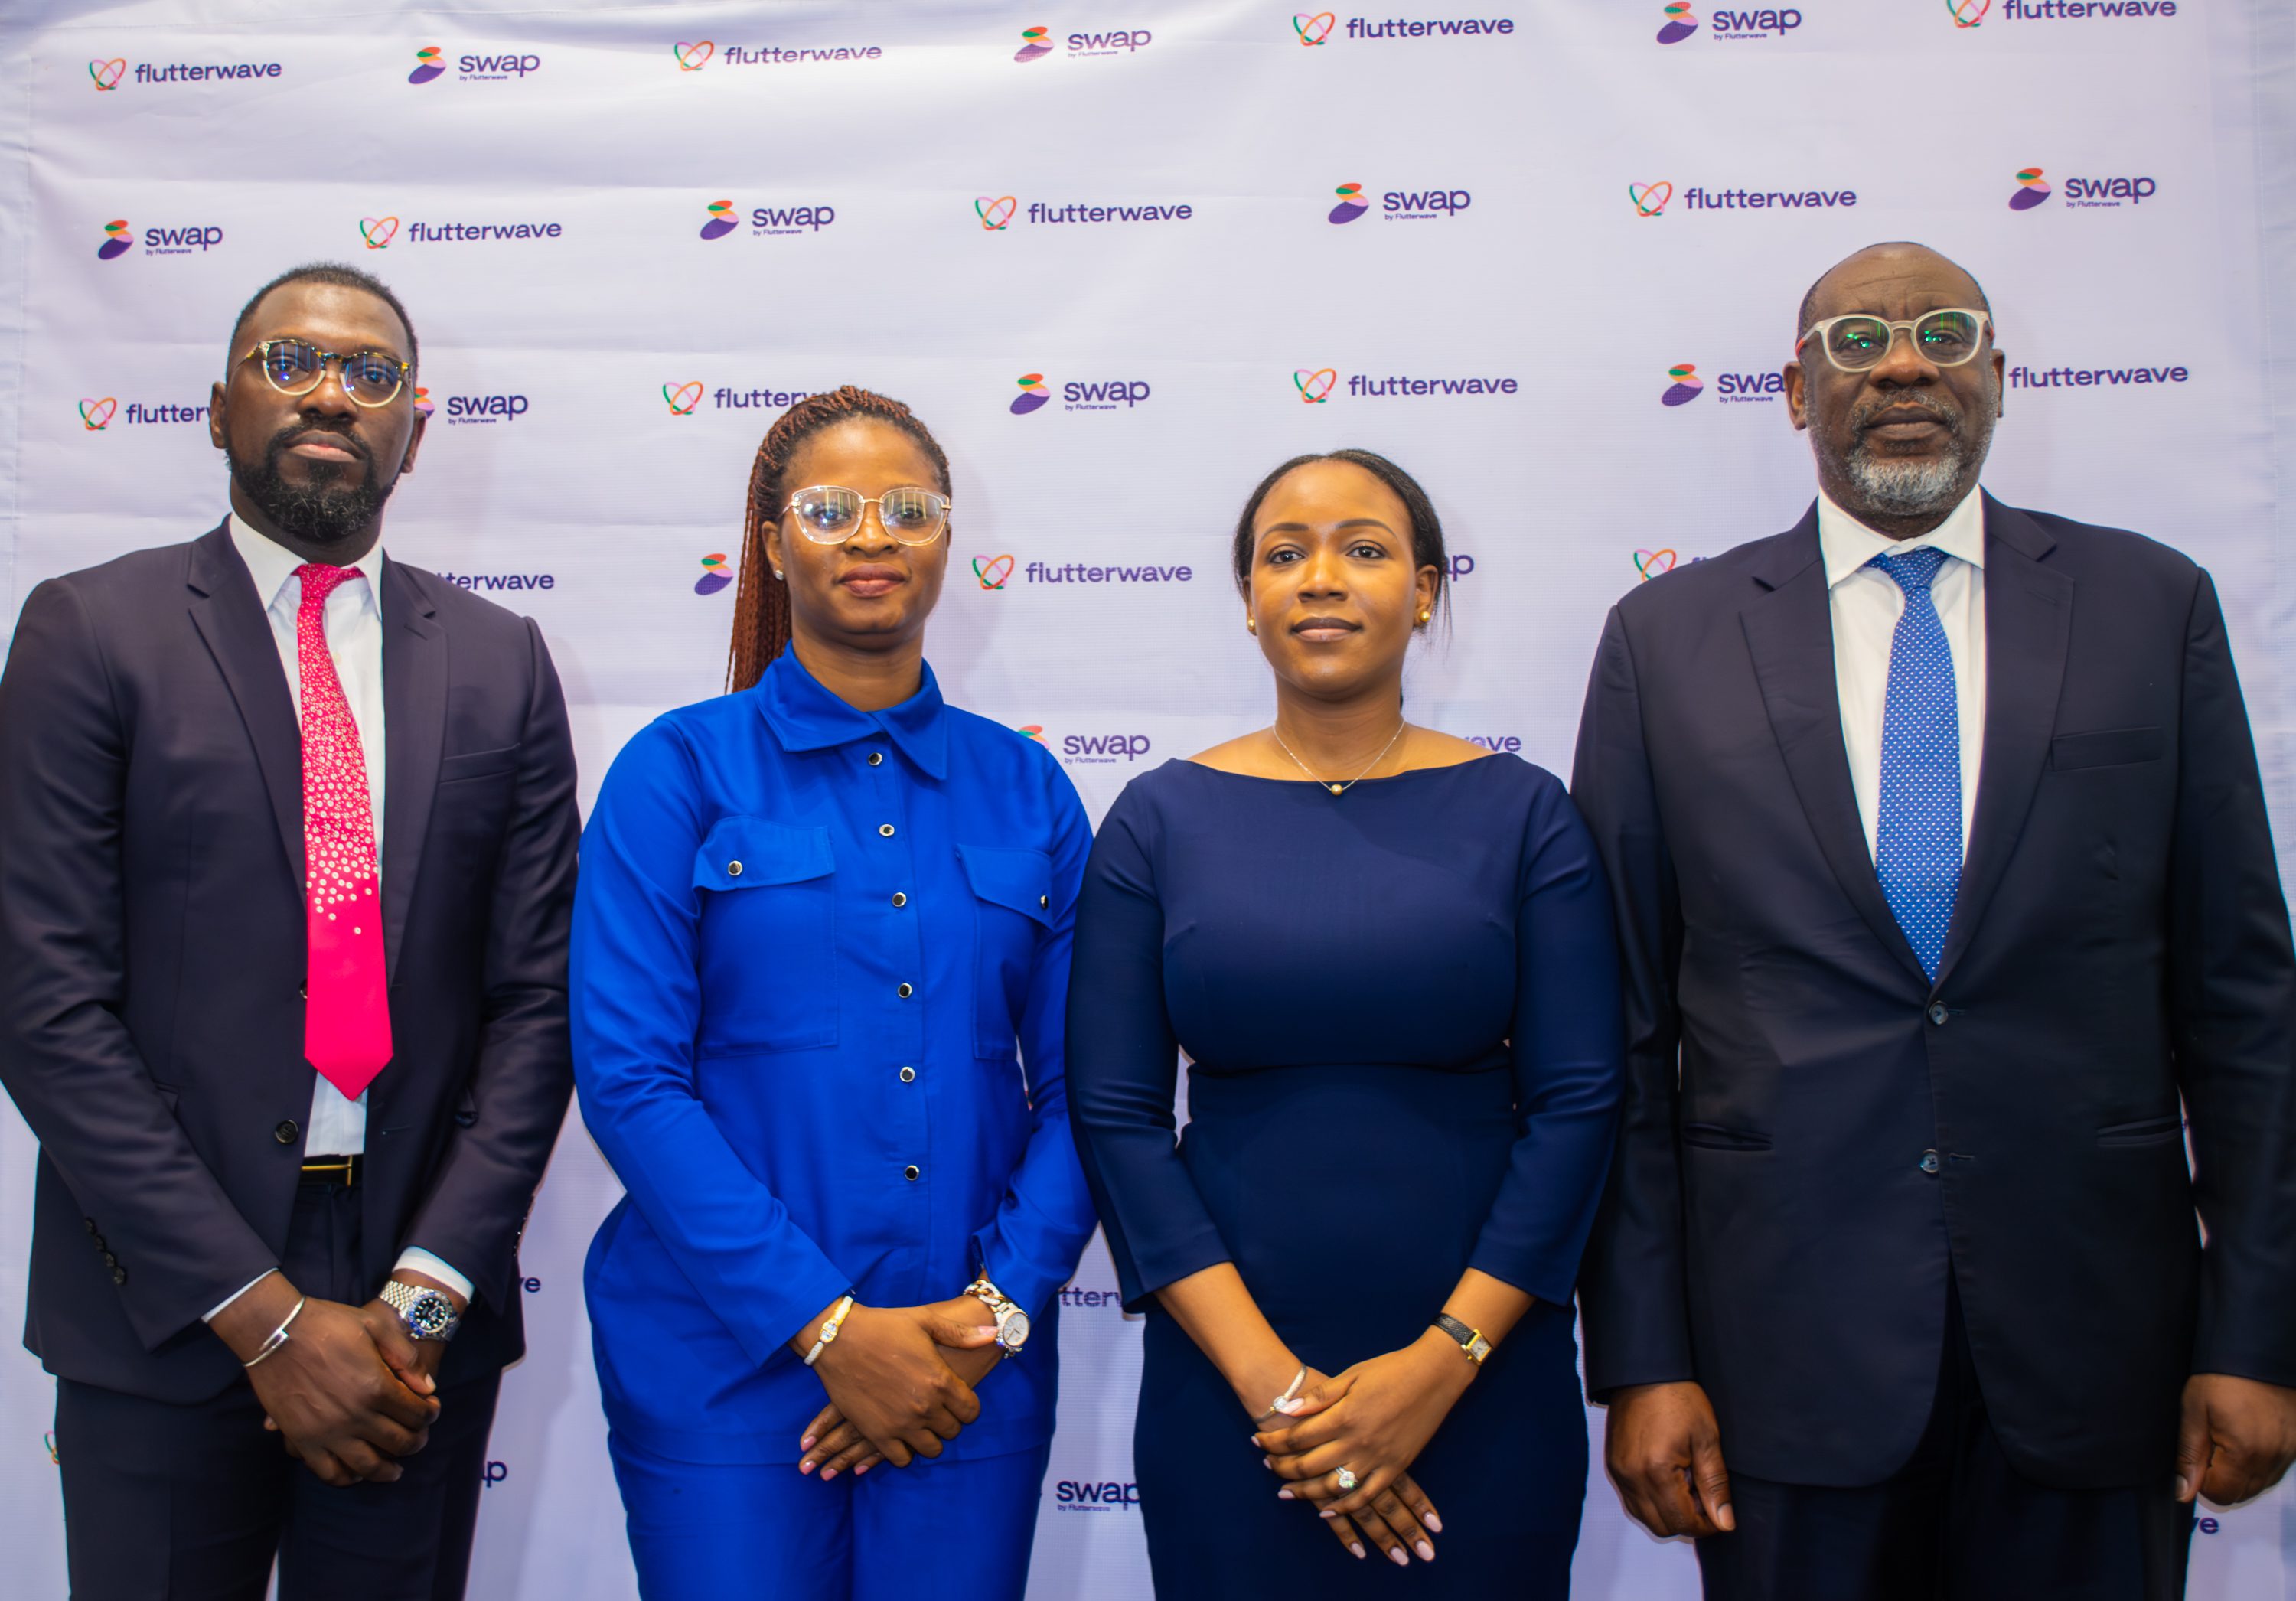 Flutterwave launches Swap, a digital platform for foreign currency exchange in Nigeria